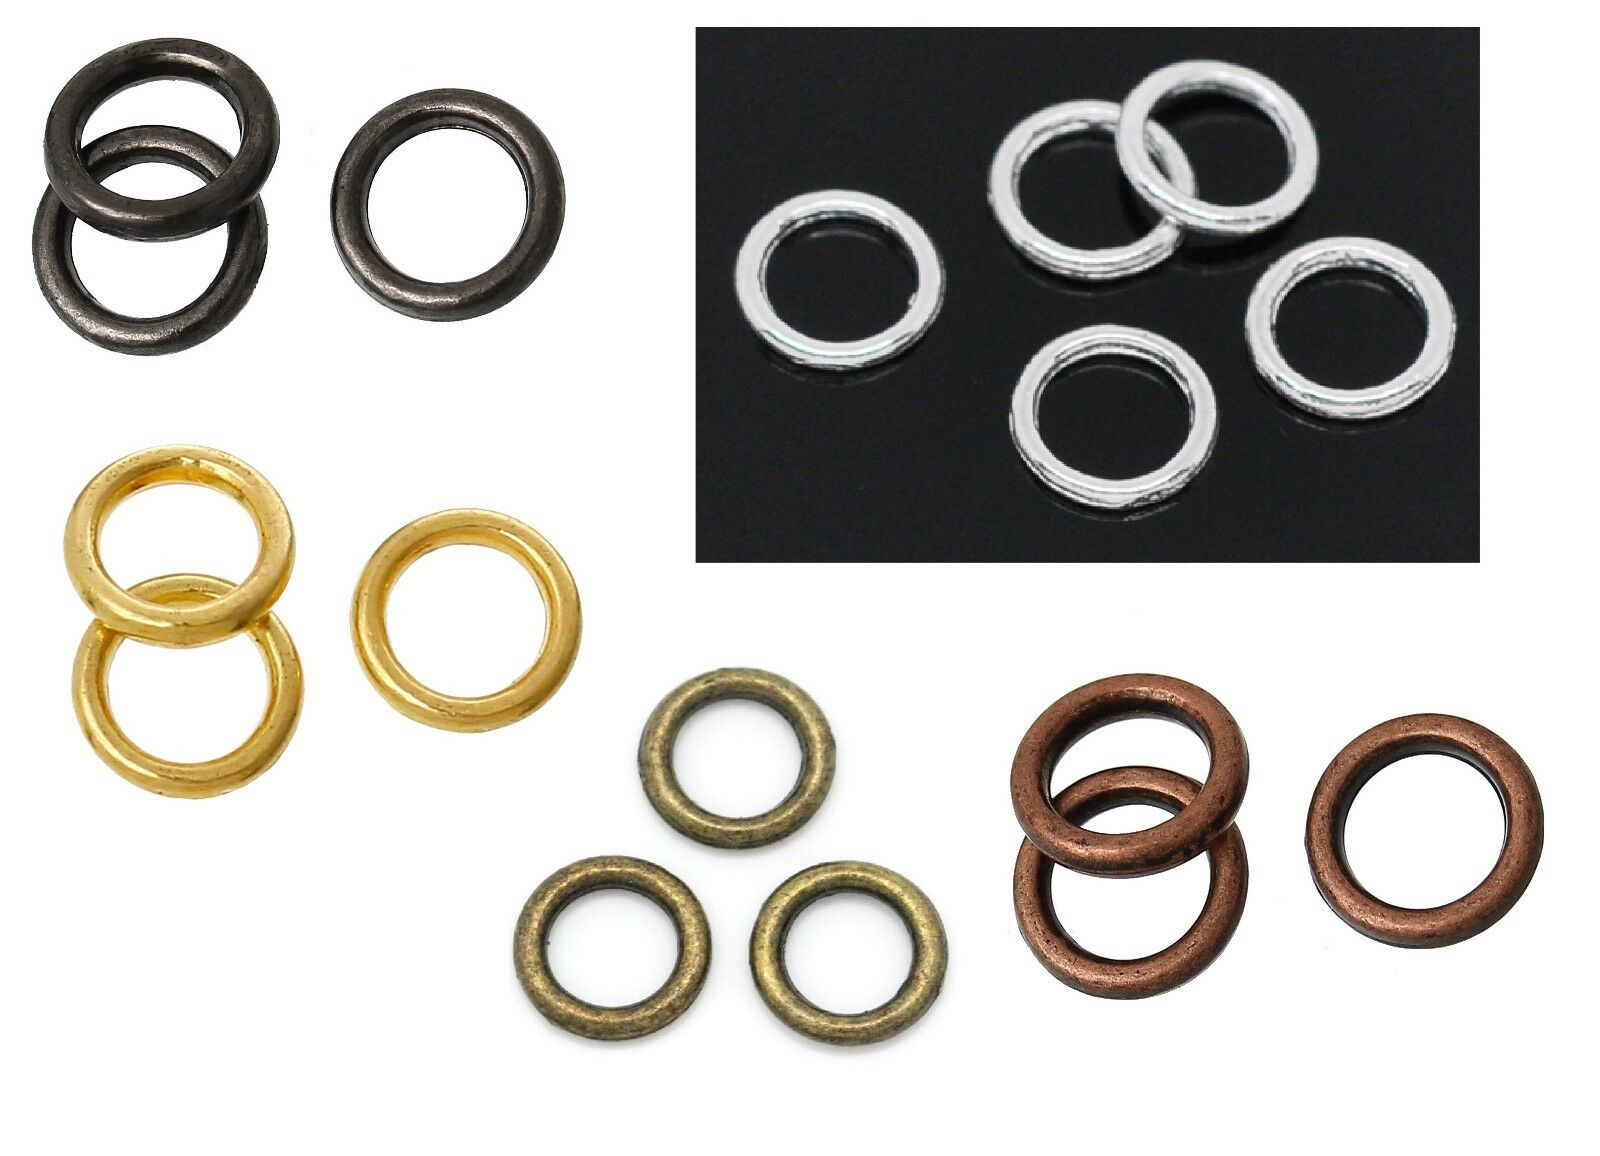 6mm Soldered Closed Jump Rings - 6 Colors Available! High Quality! 100 Pieces